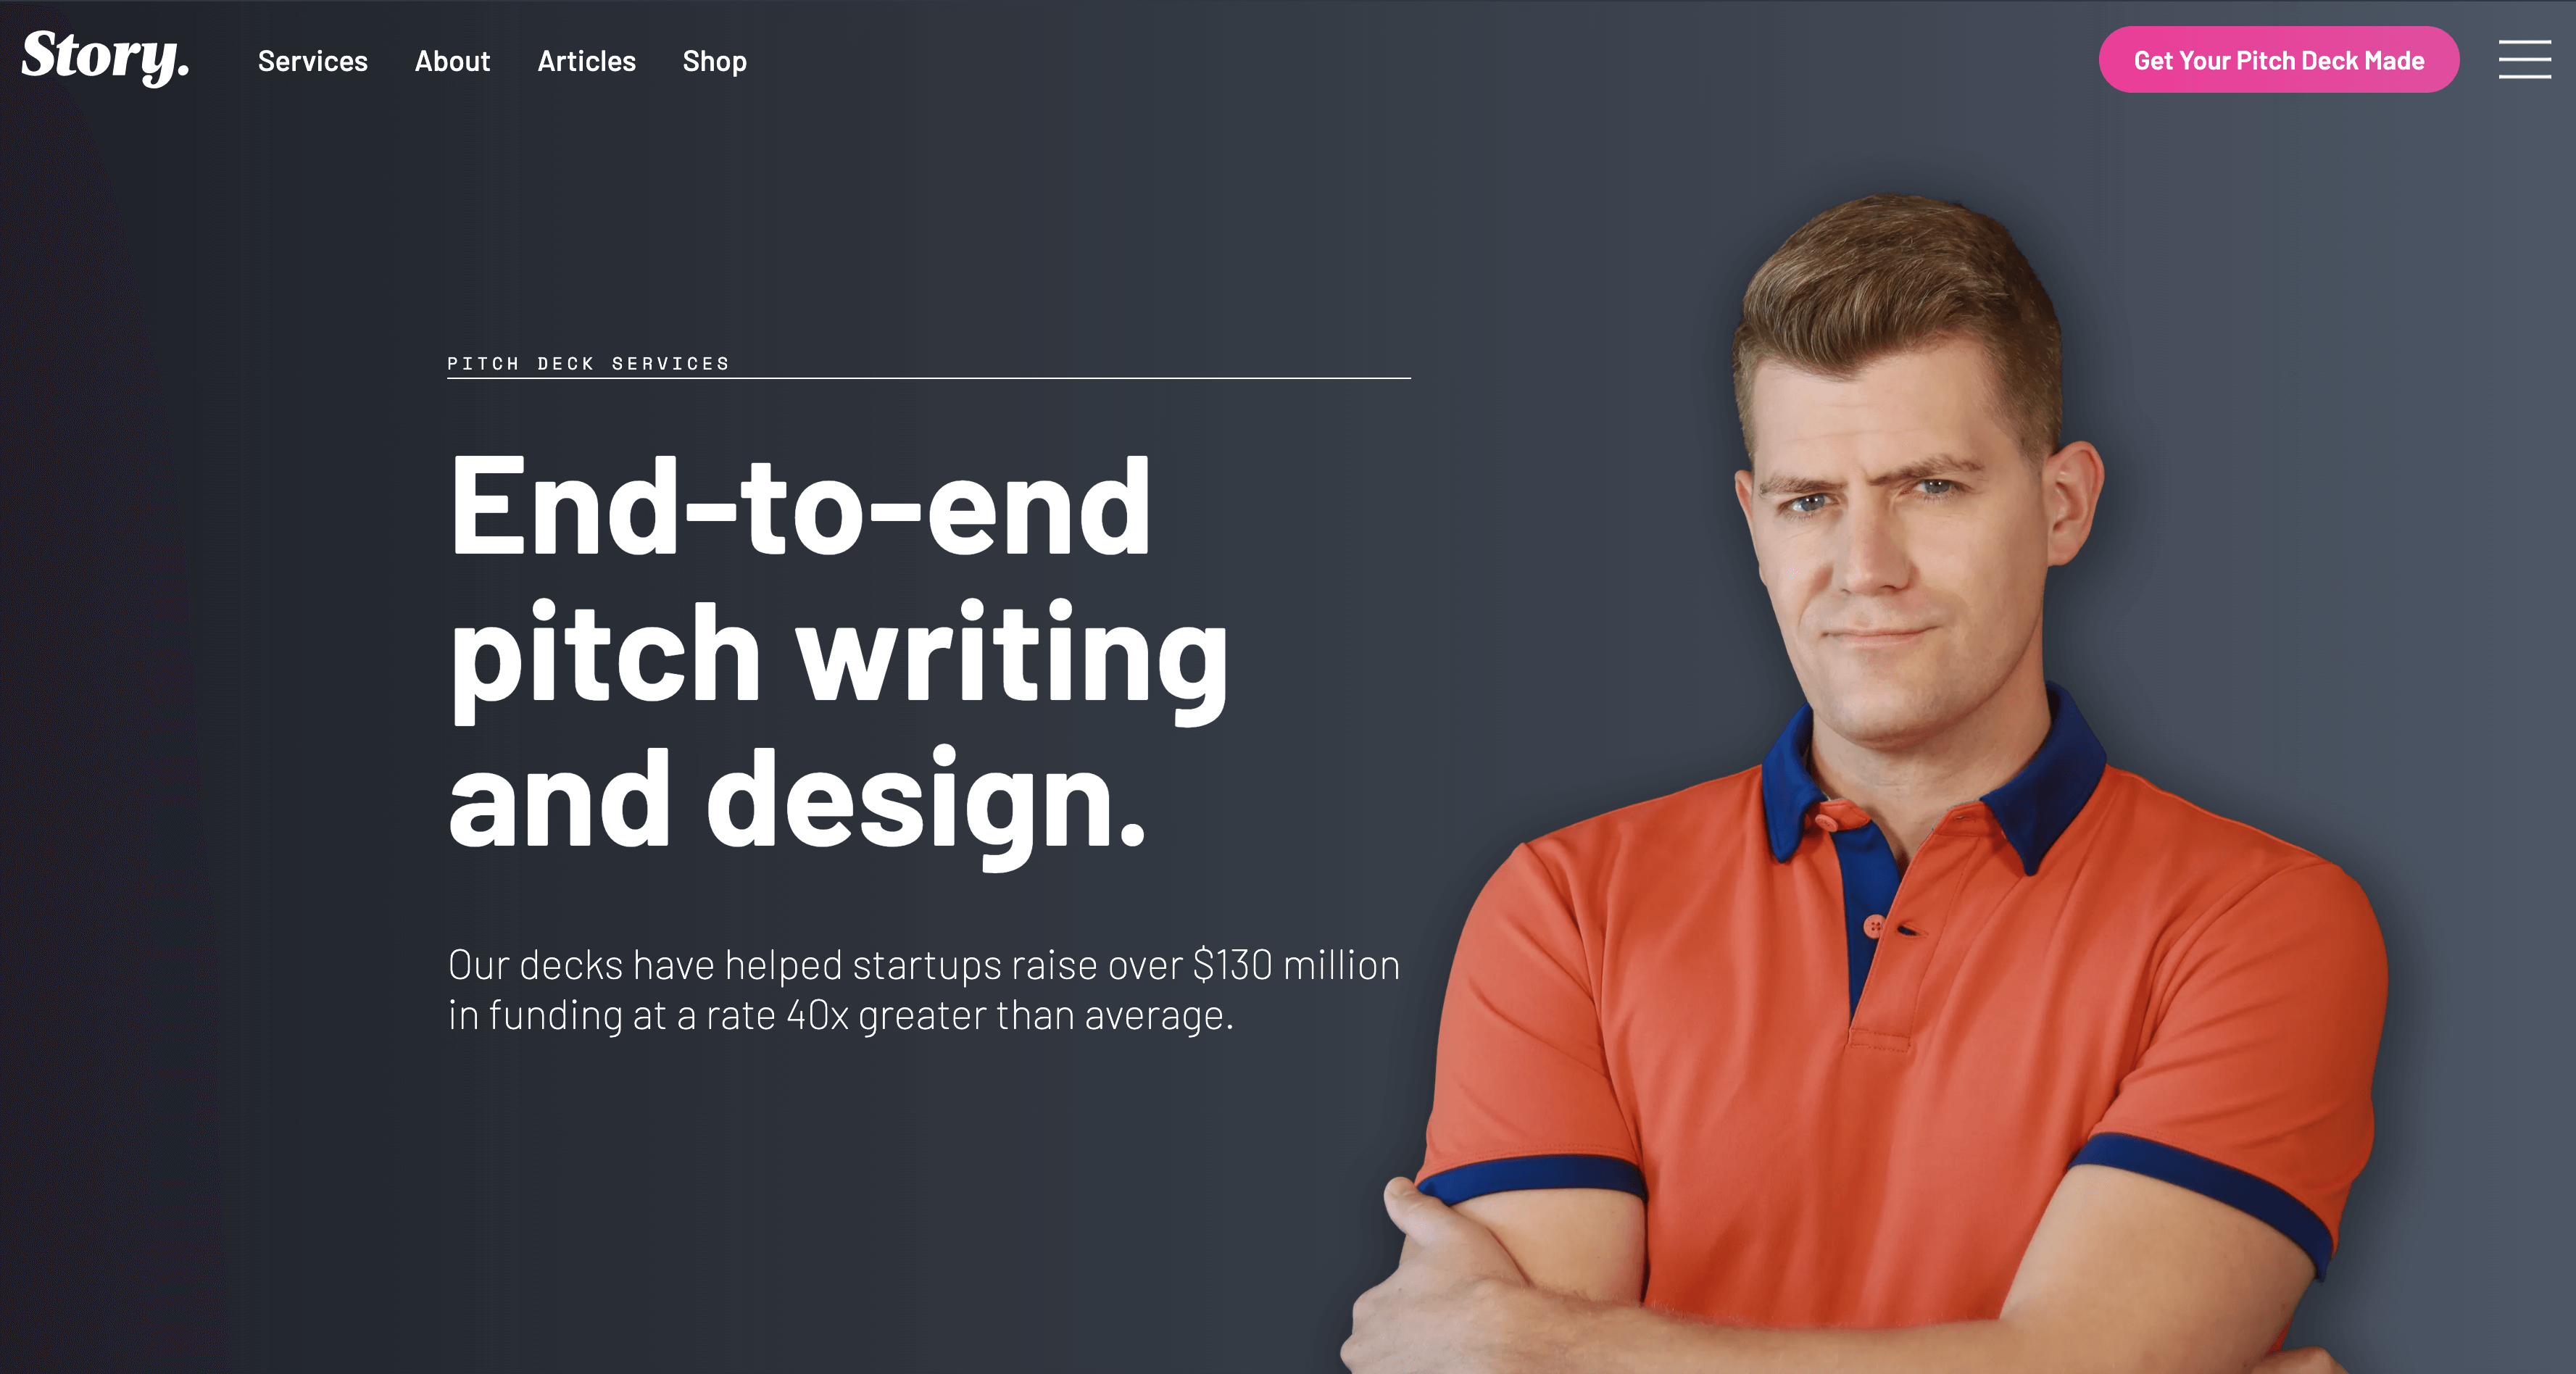 Keane Angle poses on the homepage of Story Pitch Decks.